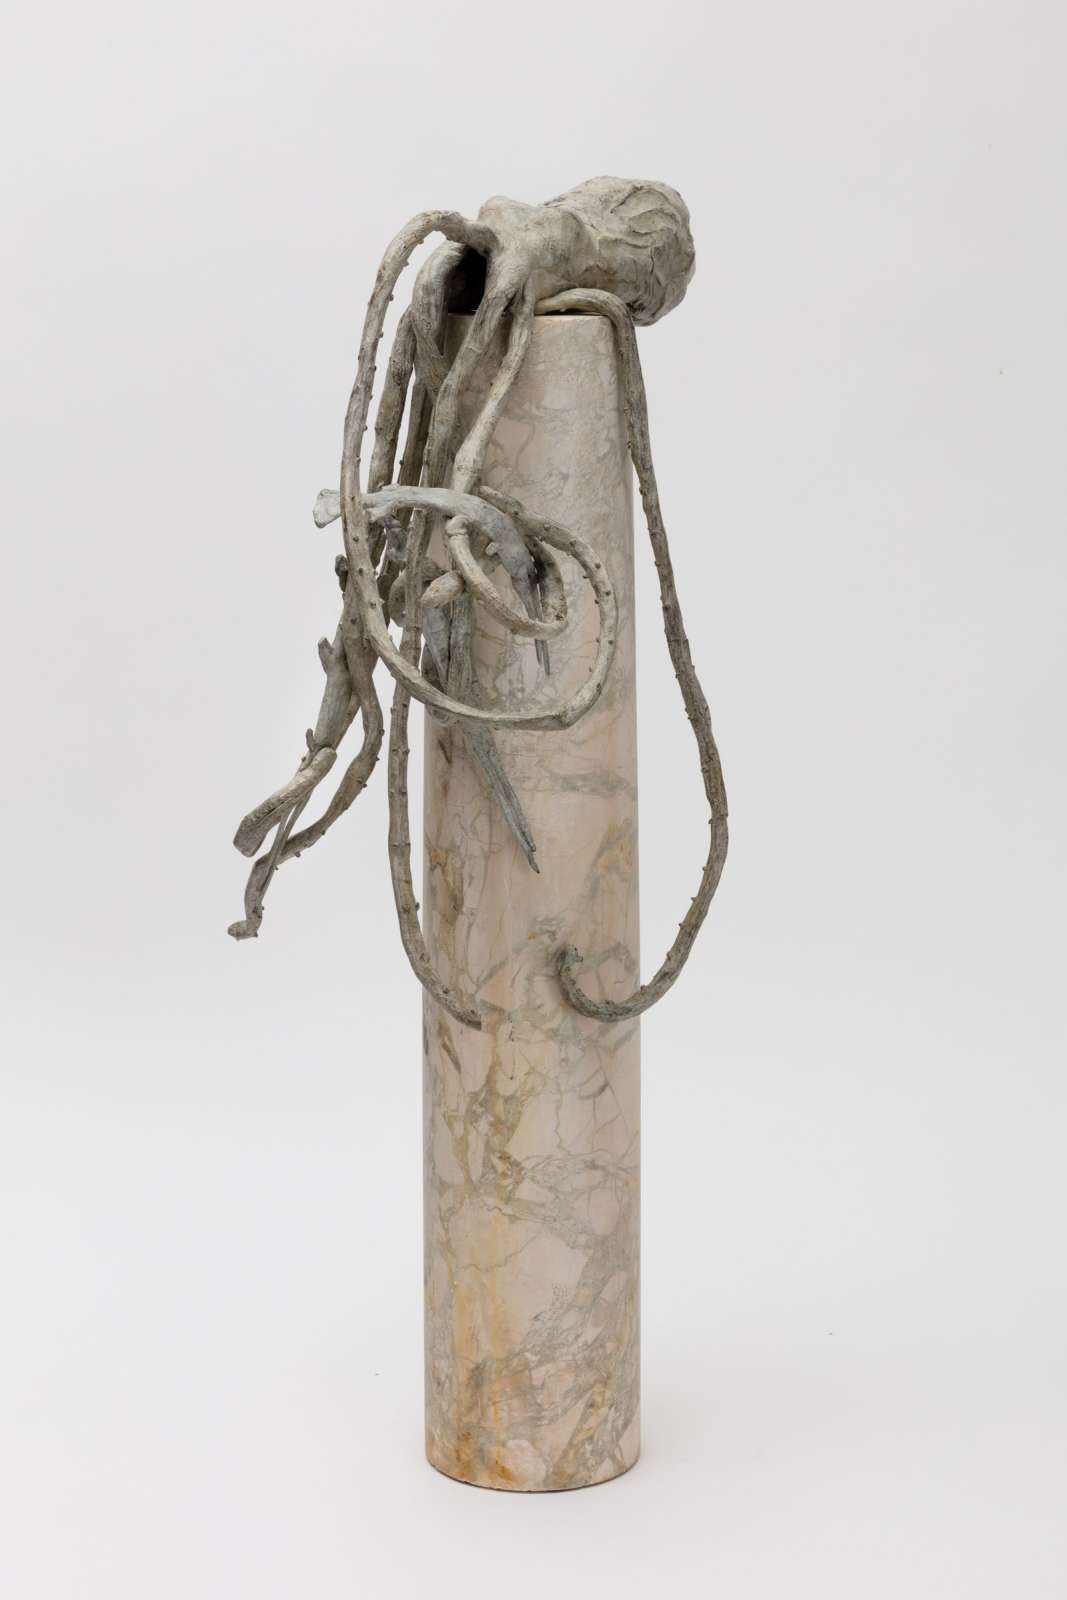 Francis Upritchard, Octopus with Fish, 2016, Bronze, marble, 82 x 26 x 39 cm. Photo Angus Mill, Courtesy the artist and Kate MacGarry